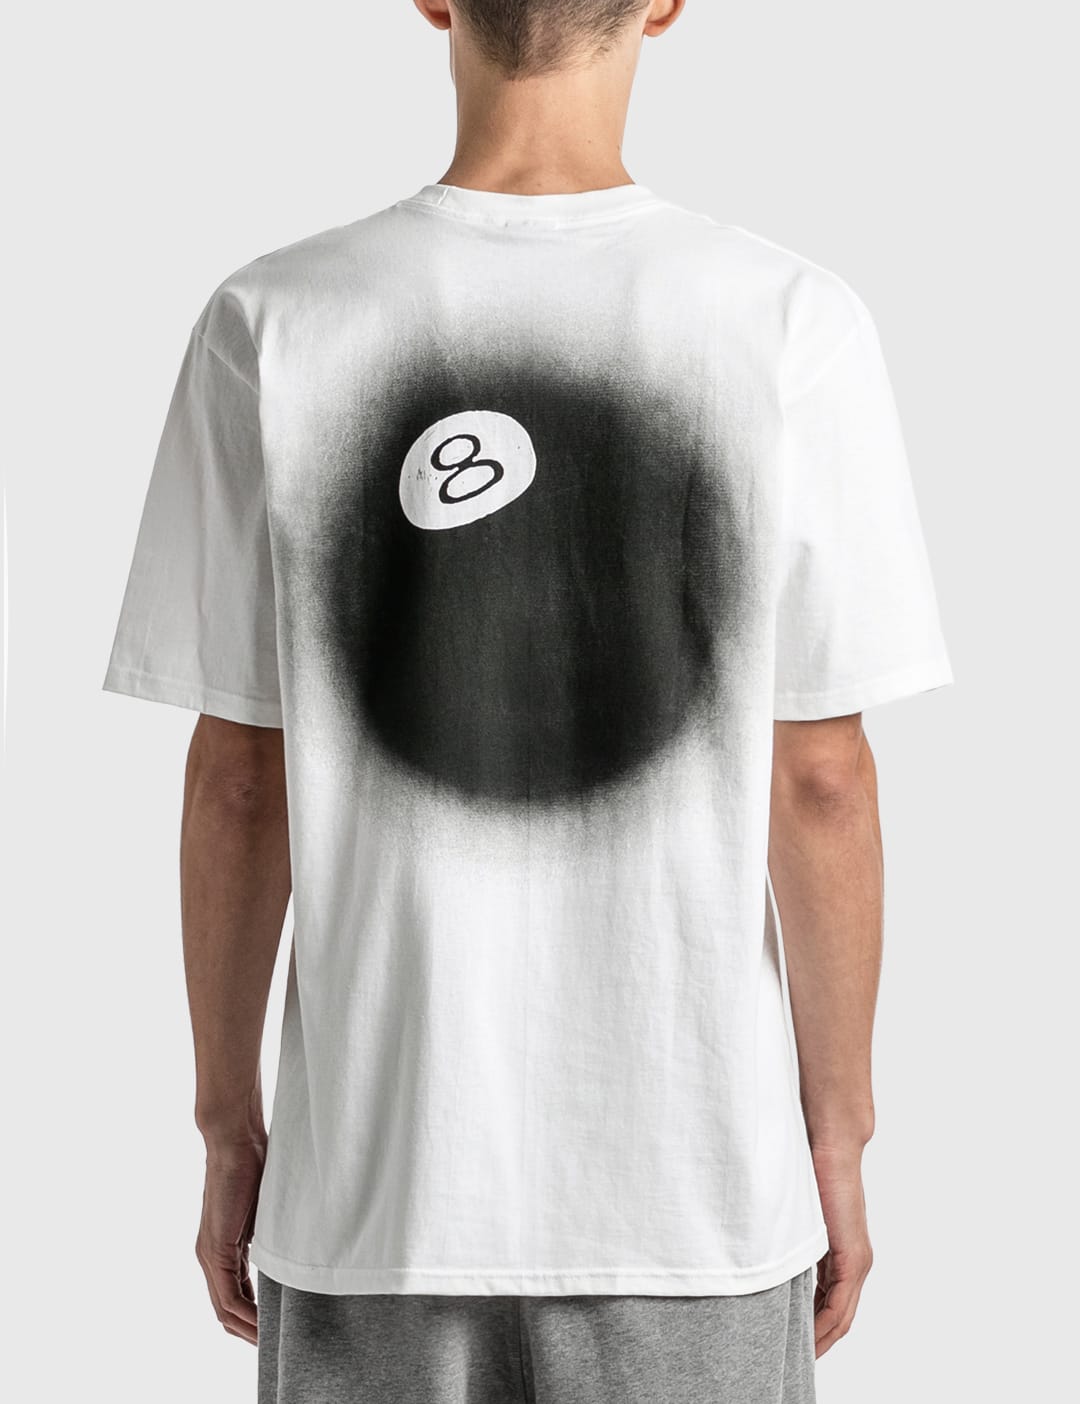 Stüssy - 8 BALL FADE T-SHIRT | HBX - Globally Curated Fashion and